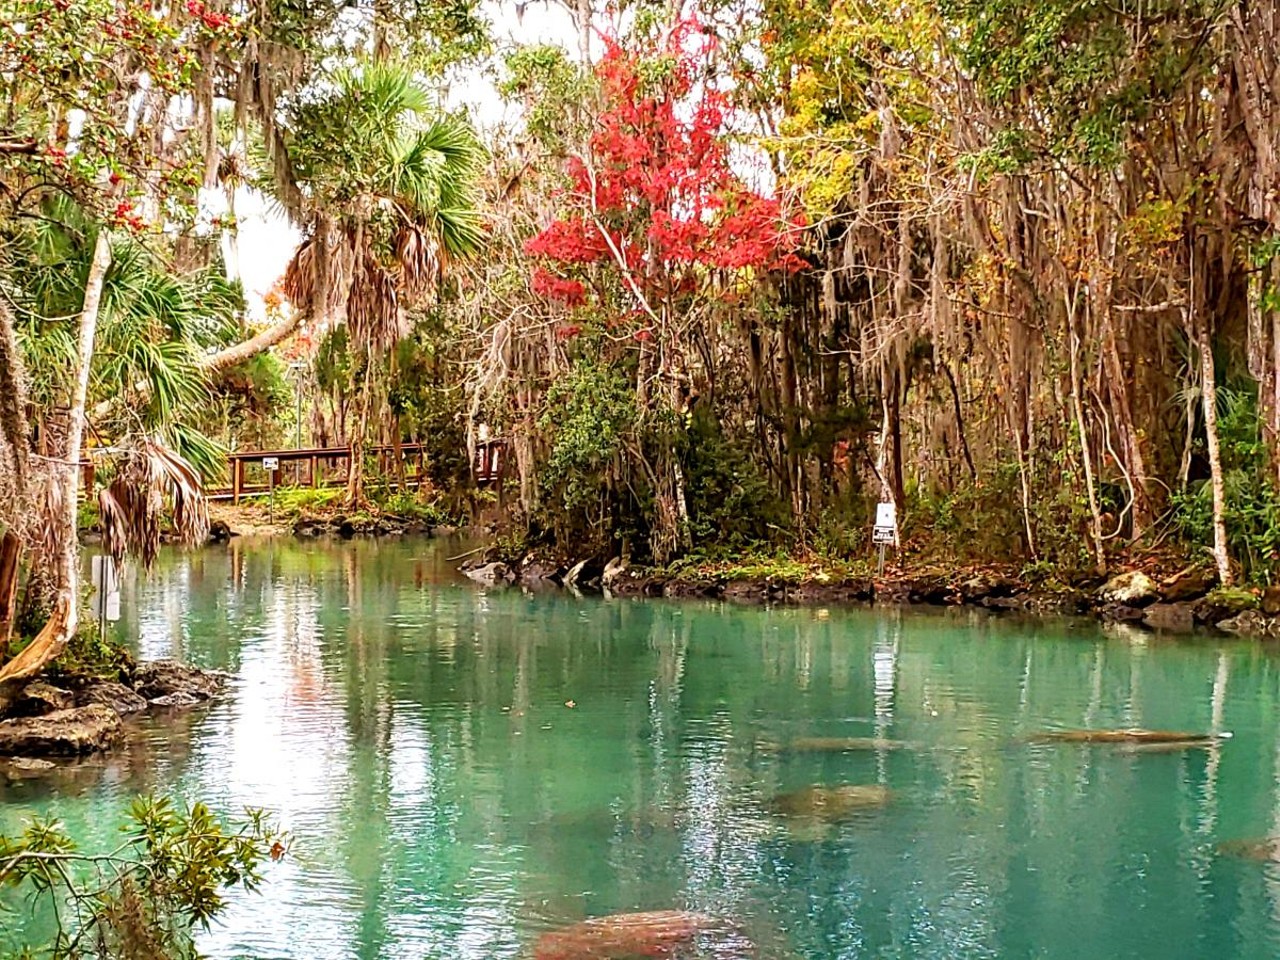 Three Sisters Springs
1 hour, 35 minutes from Orlando
Known as the manatee capital of the world, Three Sisters Springs might be the best spot to swim and spot one of the massive animals. Even if you decide not to do a manatee tour, the clear water allows everyone to get the chance to spot one.